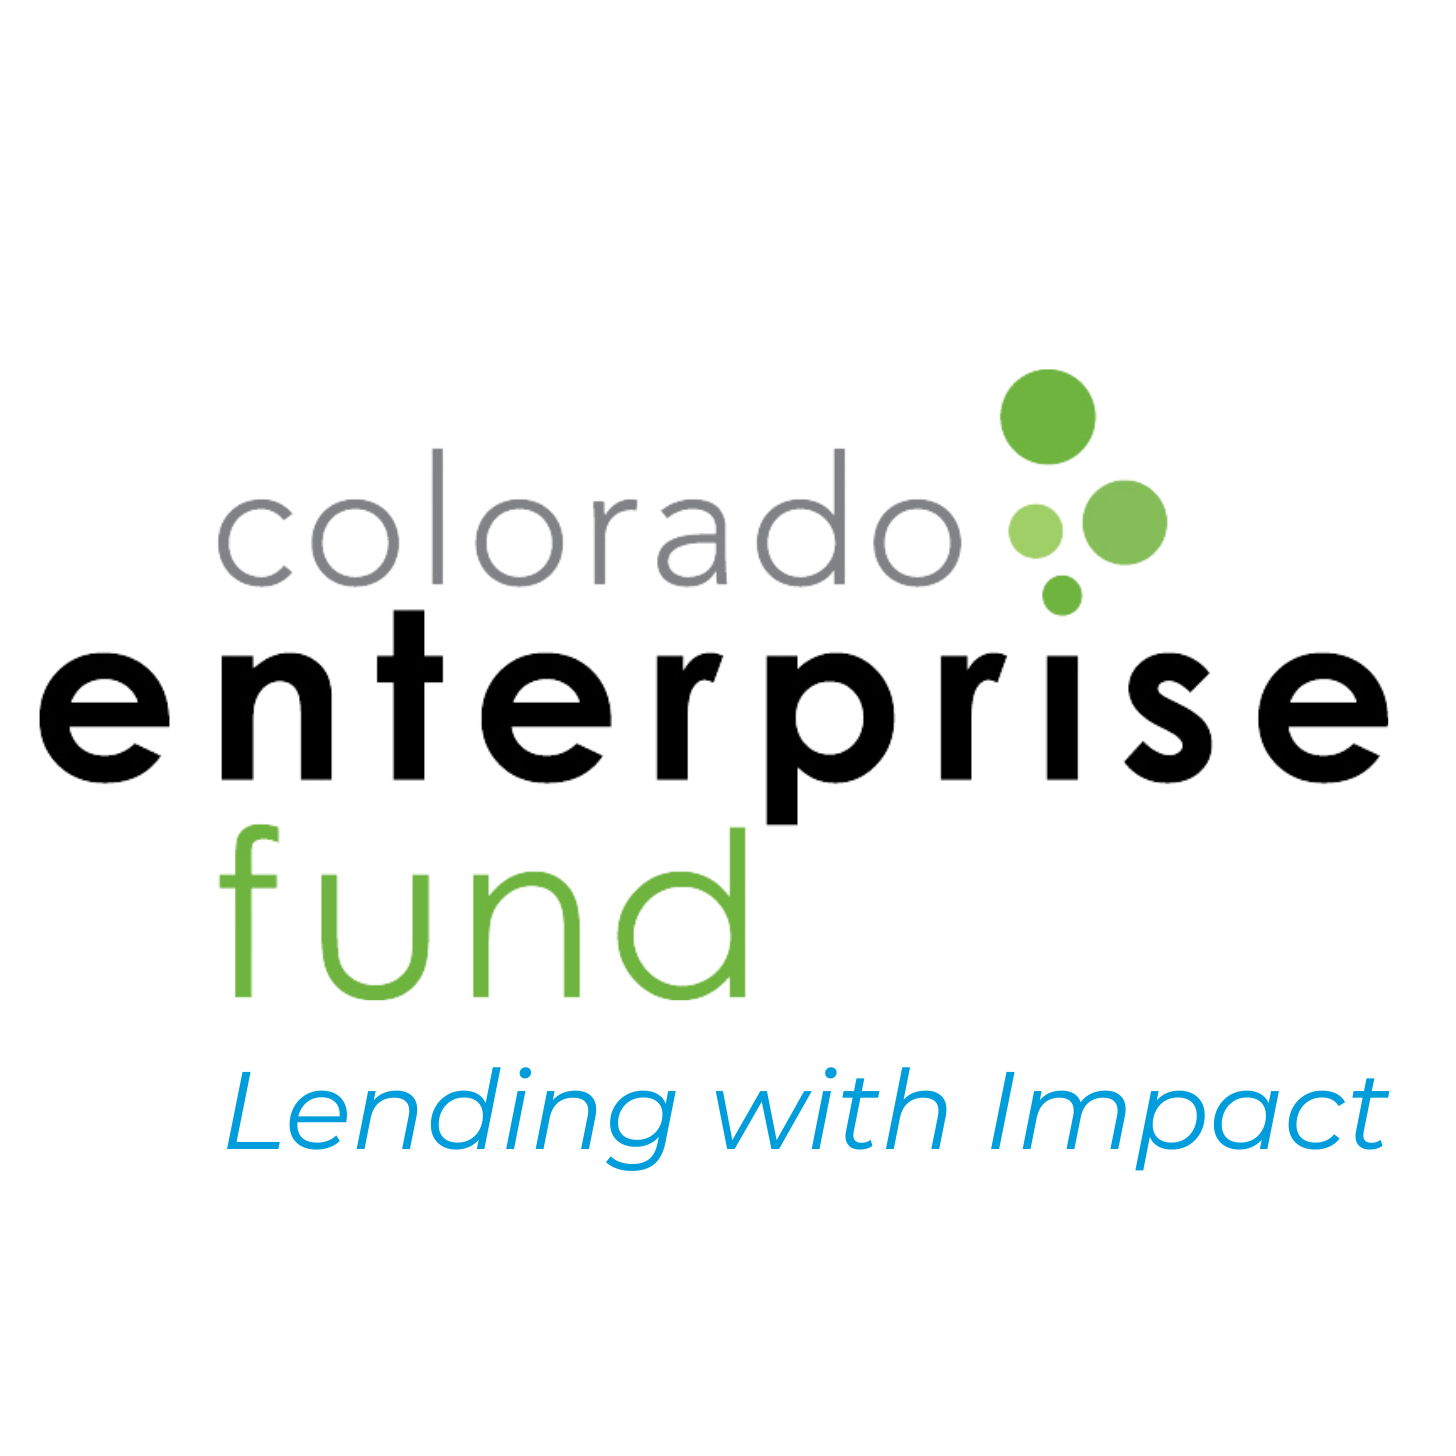 Logo of Colorado Enterprise Fund. It is gray, black, green, and blue. Colorado is in gray, enterprise is in black, and fund is in green. There are four different sized circles next to Colorado. Lending with impact is at the bottom of the logo in blue font.